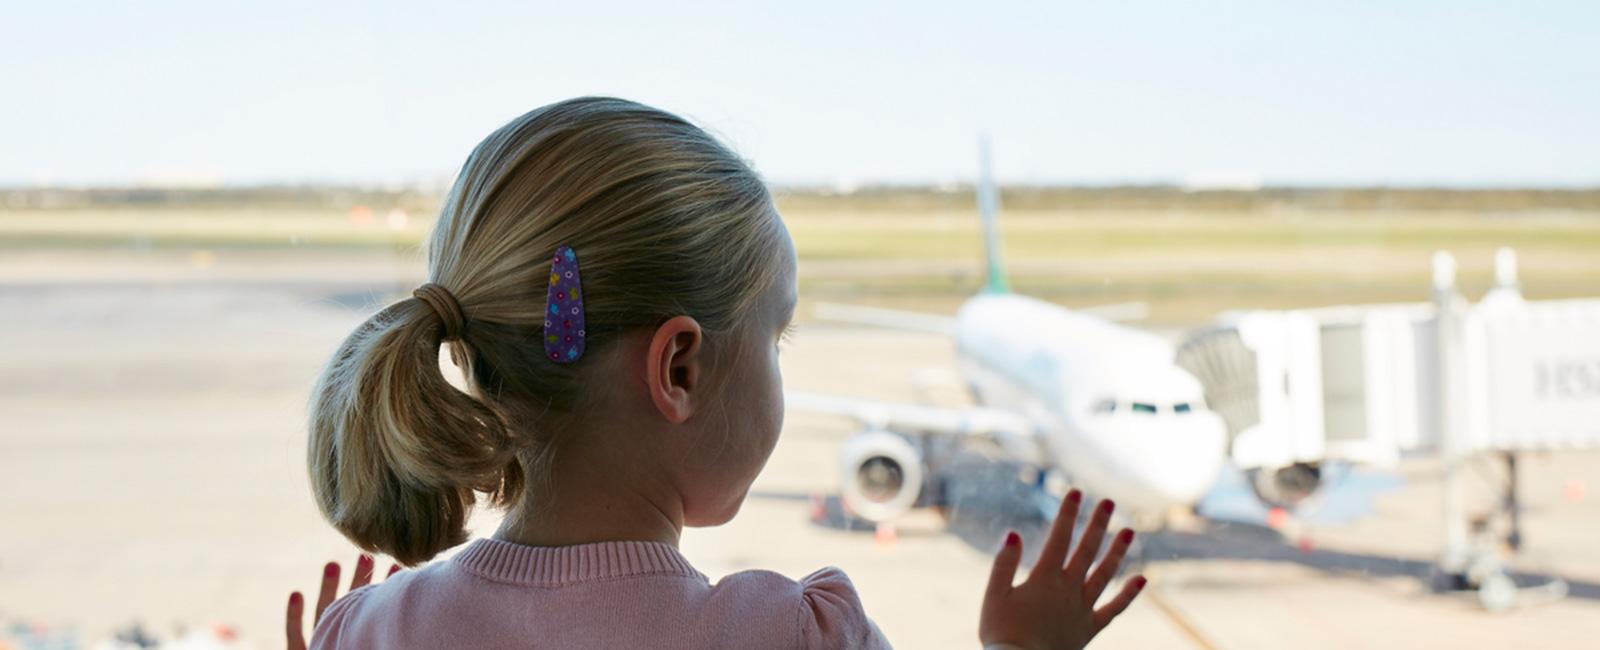 Plane spotting with children at Brisbane Airport | Tips for travelling with children